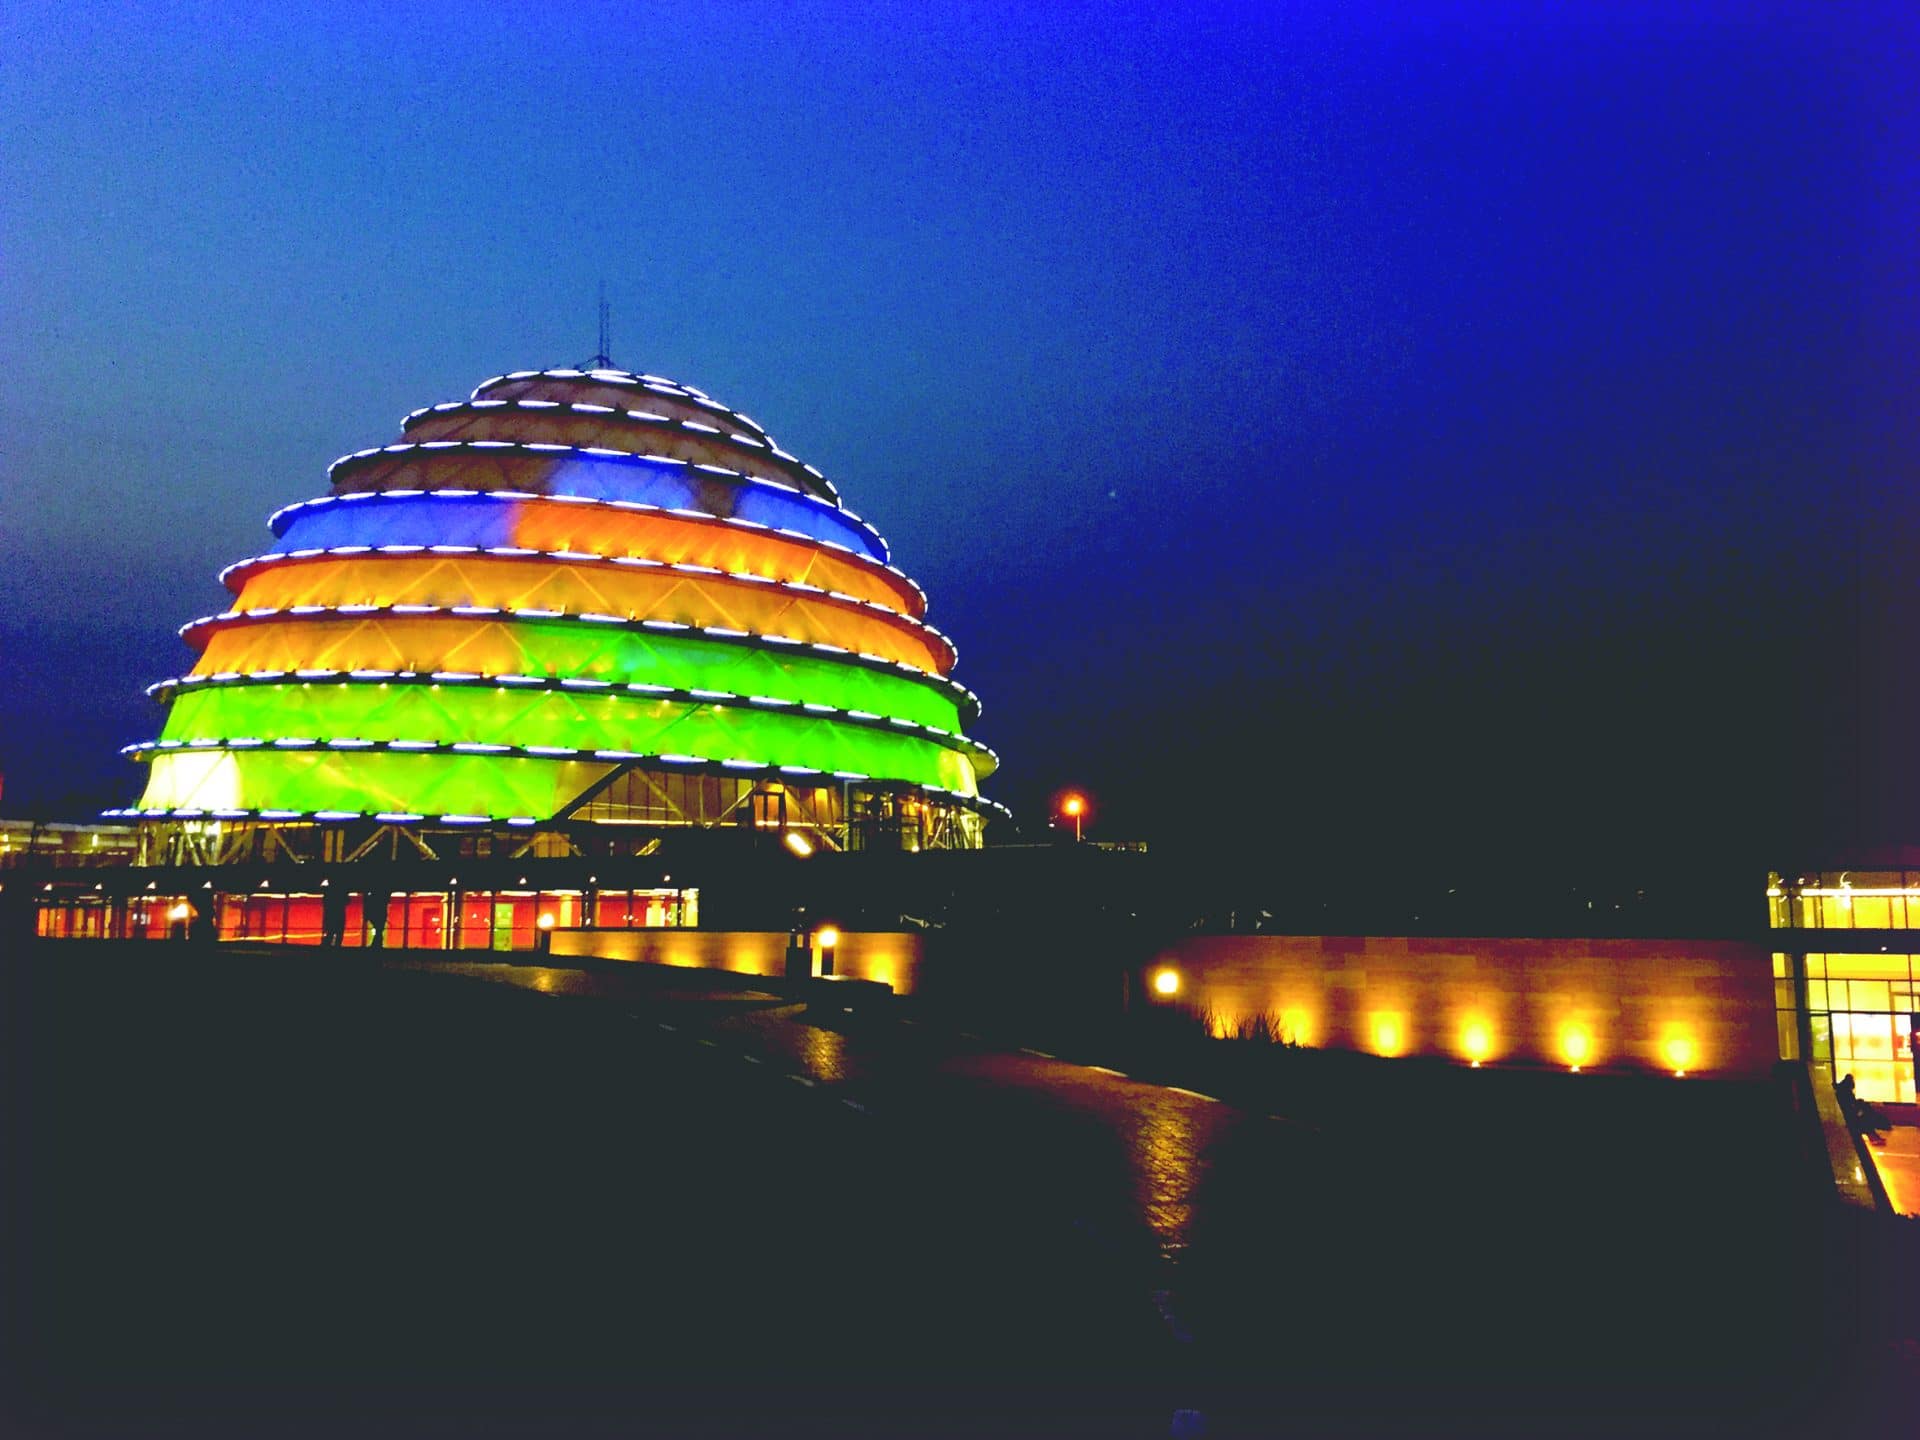 The-Kigali-Convention-Centres-design-is-inspired-by-traditional-Rwandan-baskets